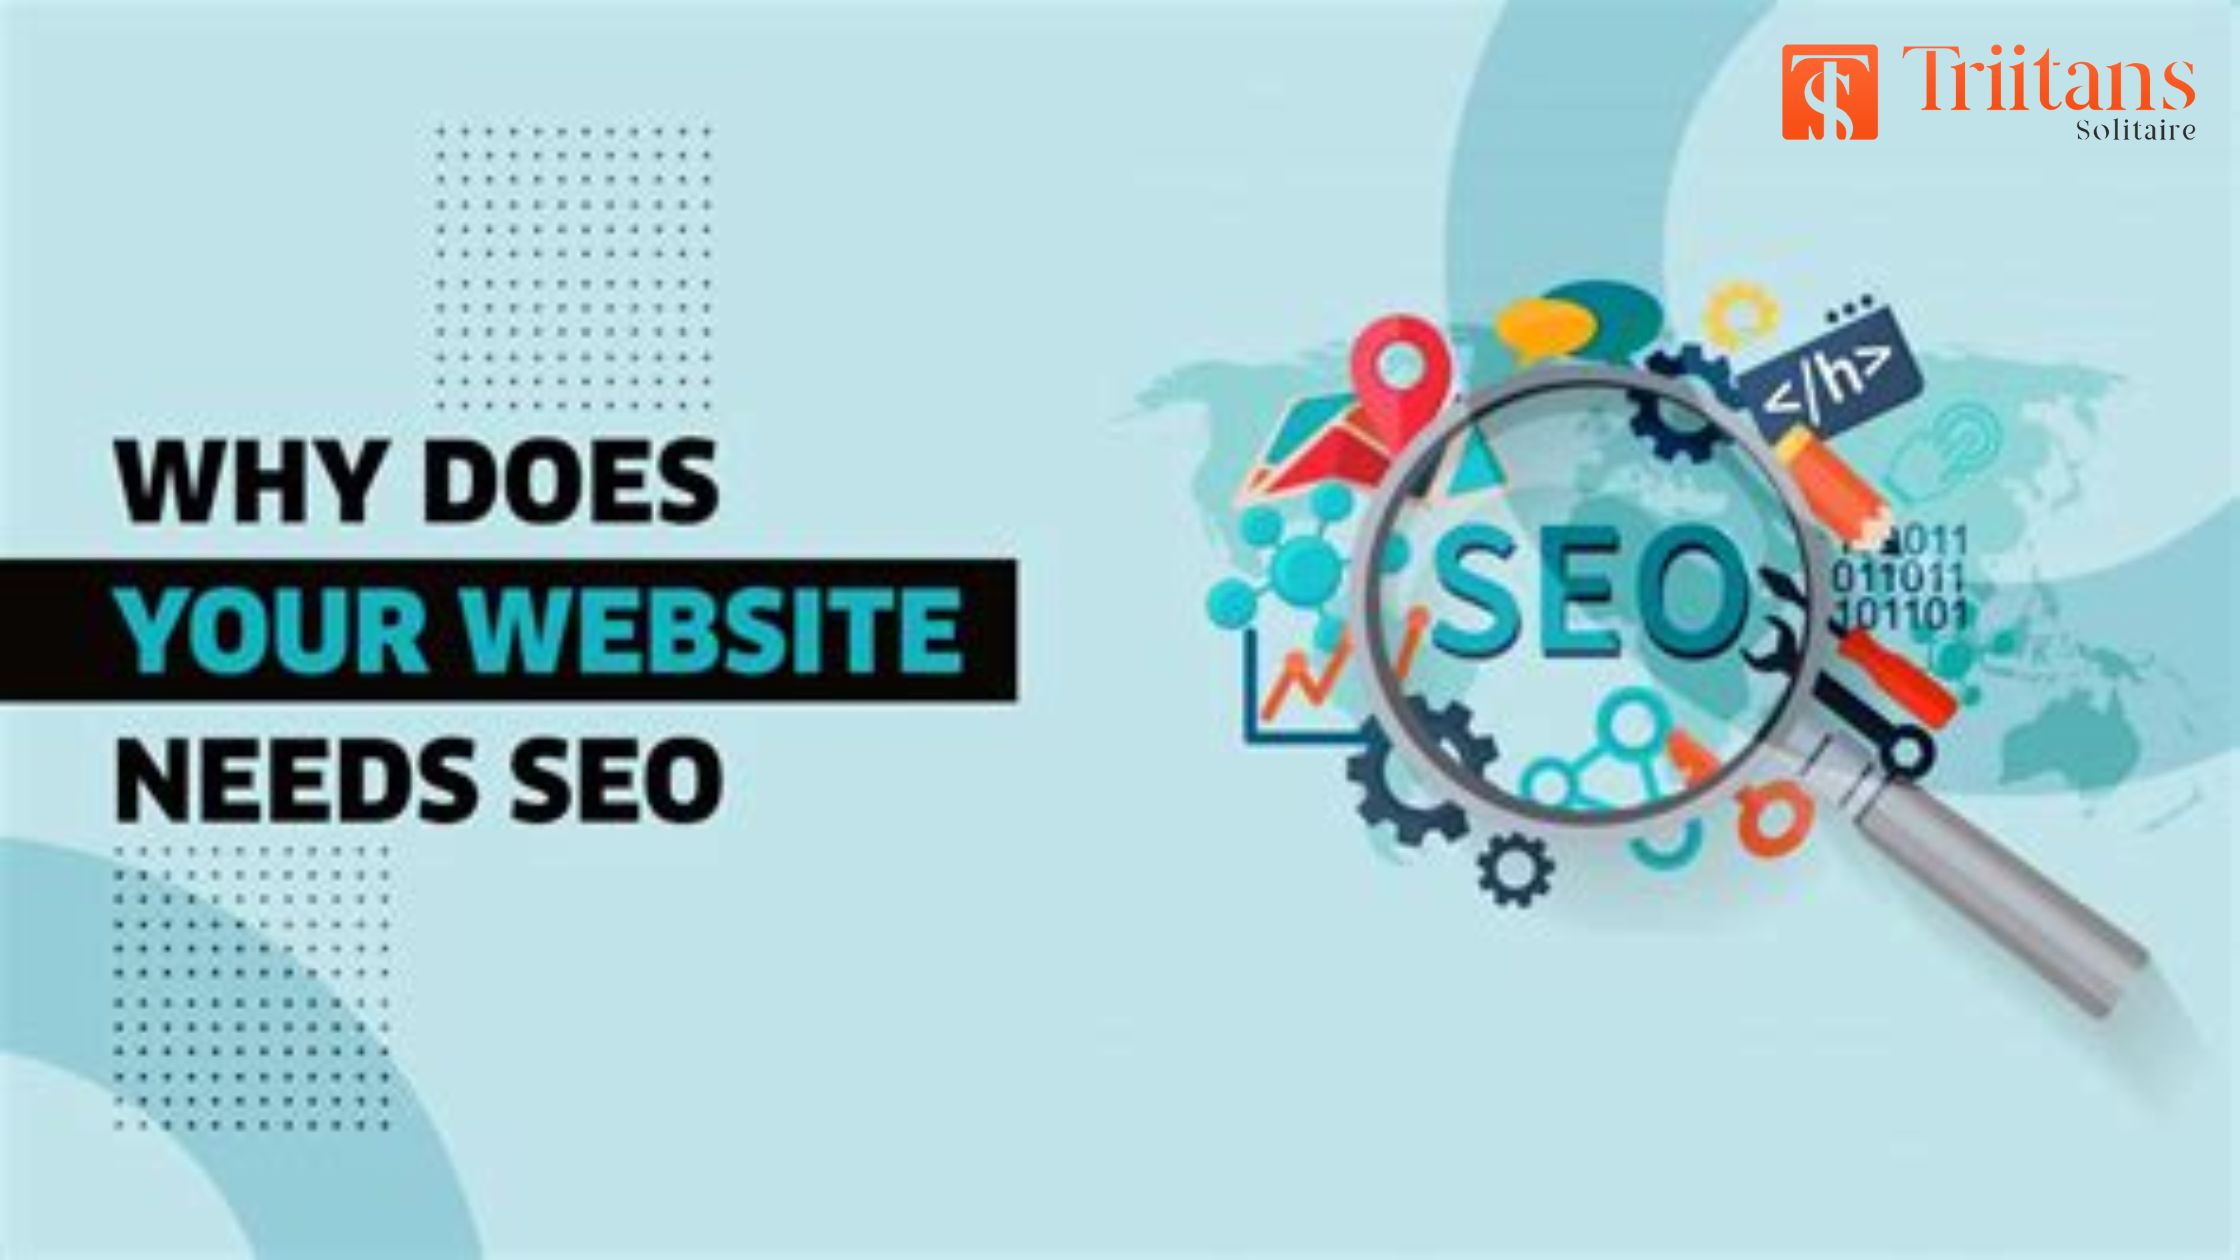 Reasons why your website needs SEO